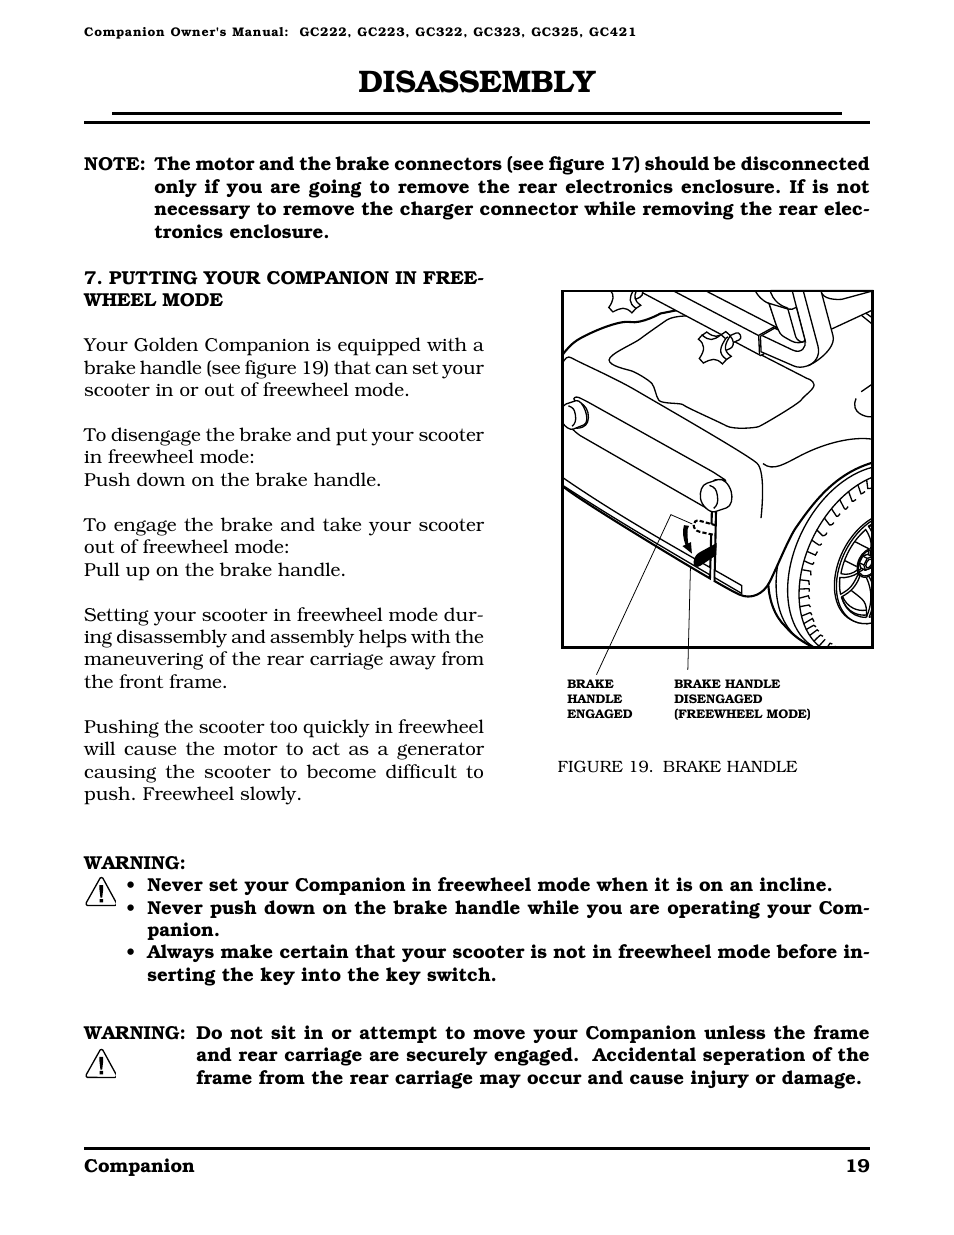 Disassembly | Golden Technologies Companion II User Manual | Page 21 / 41